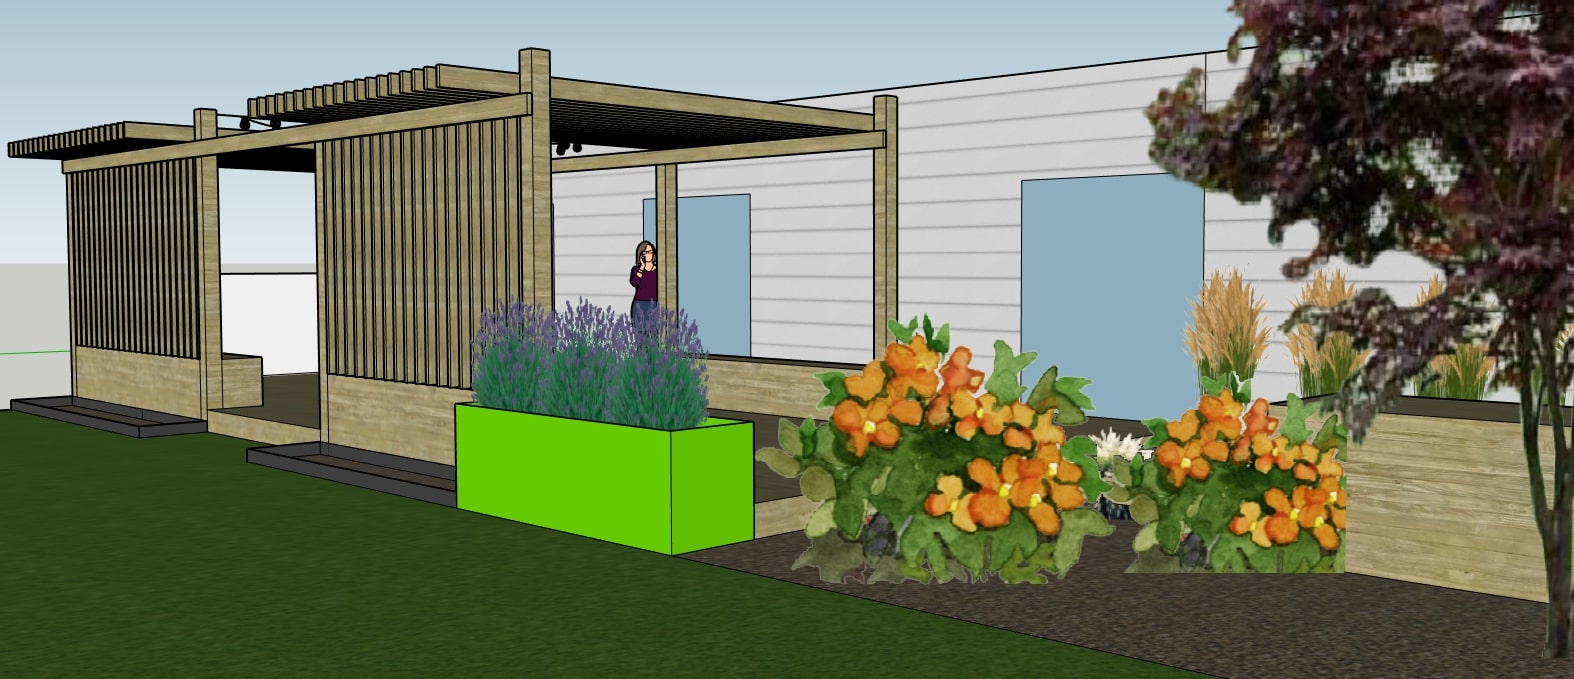 Rendering of Musquodoboit Outdoor Library plan